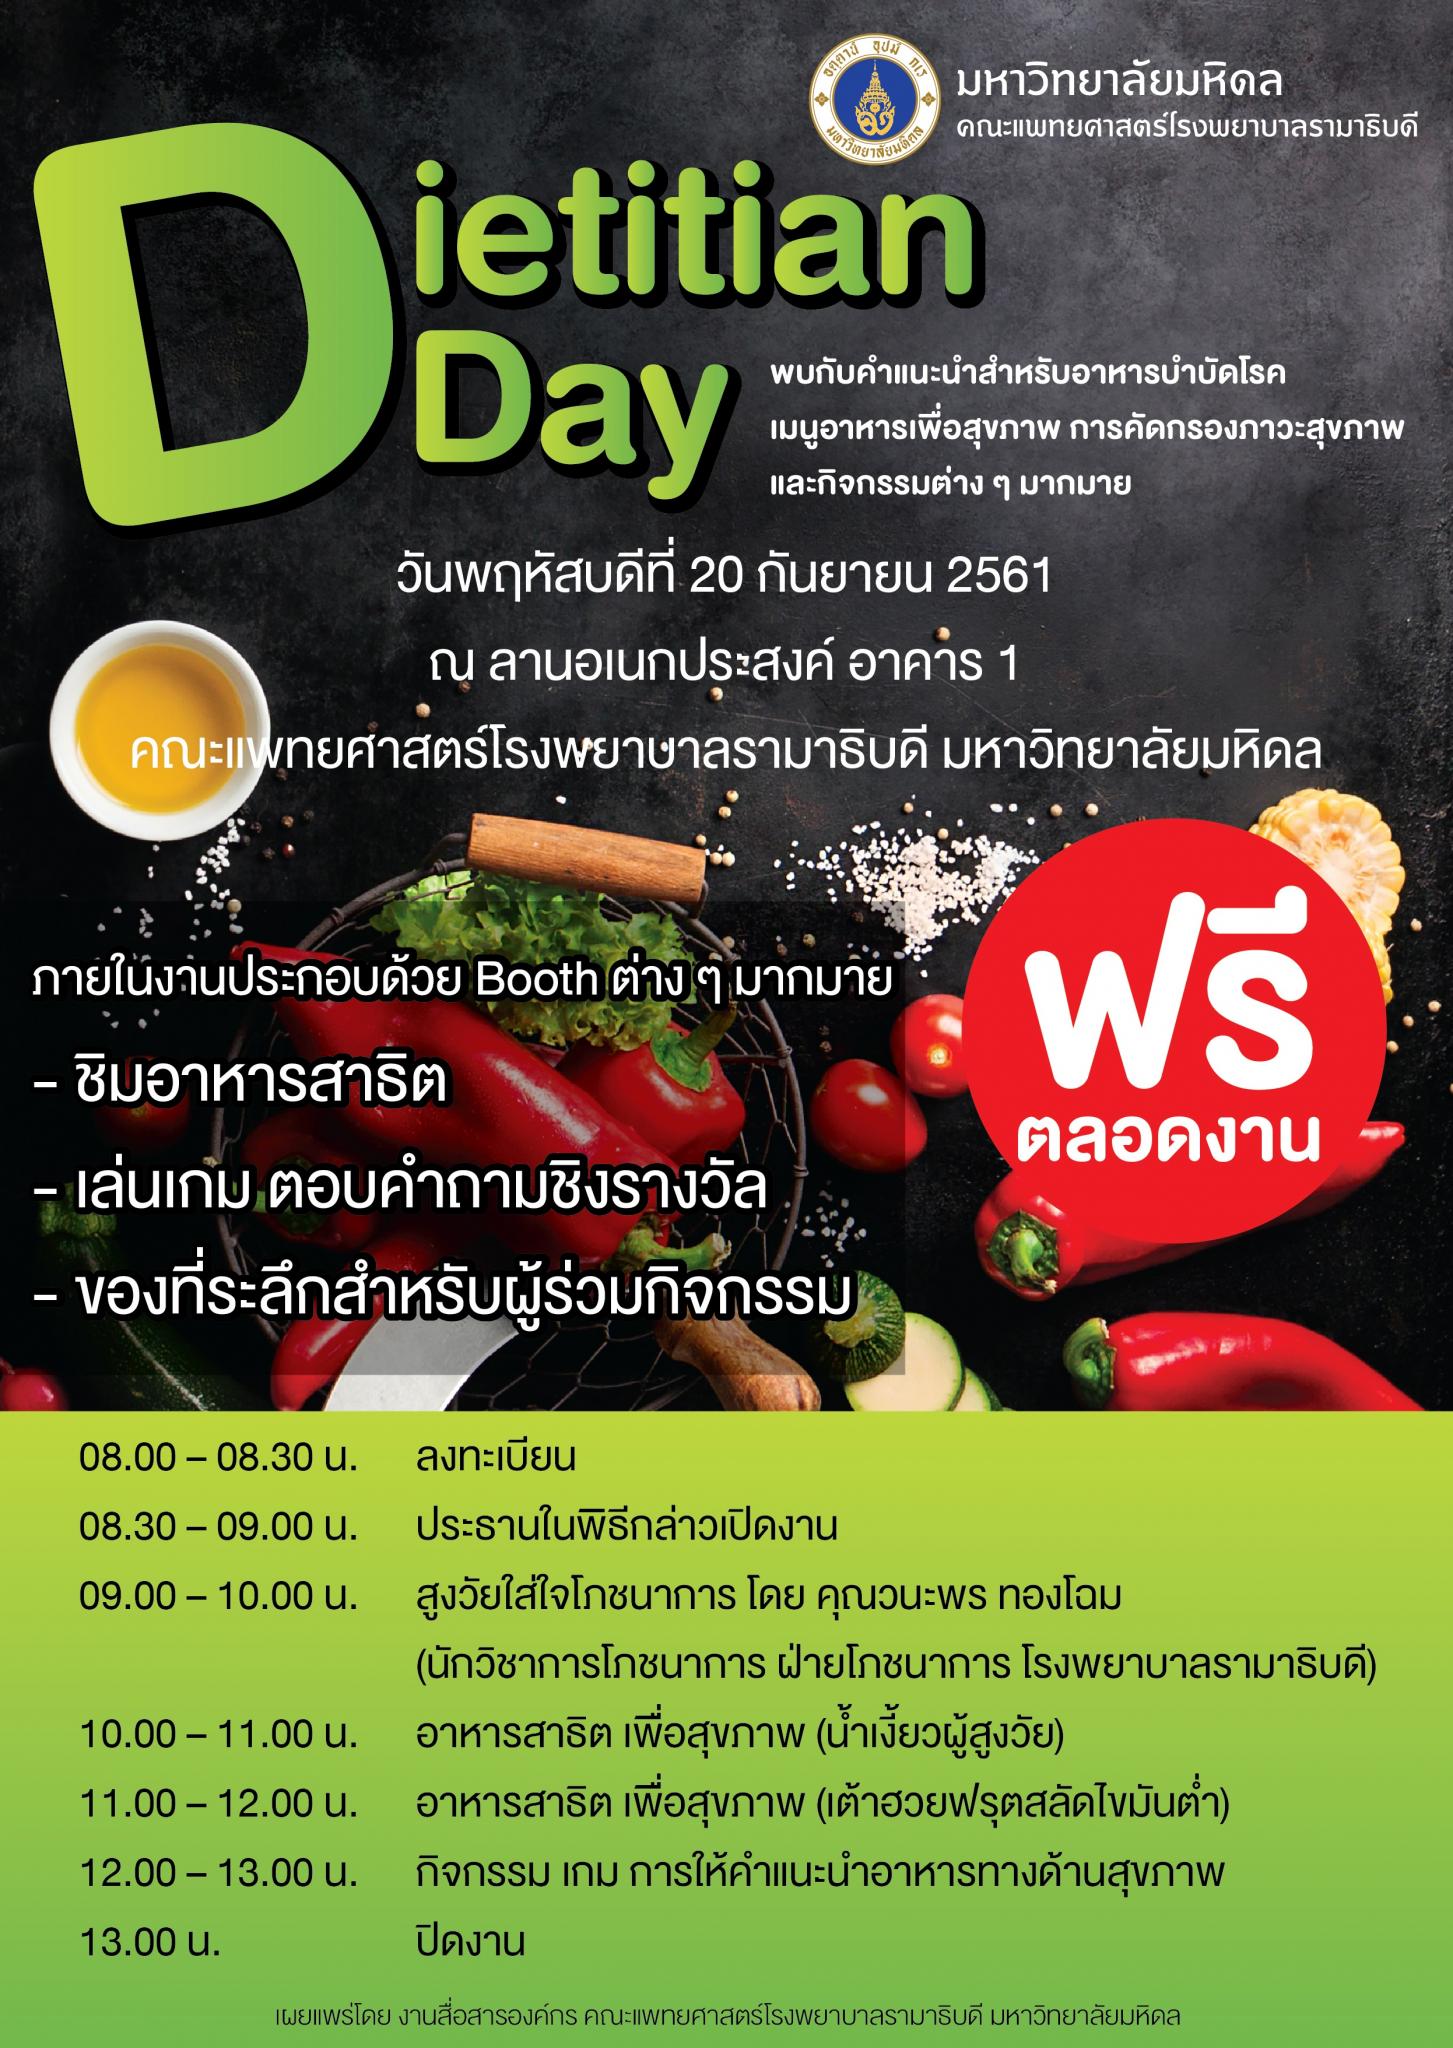 Dietitian Day